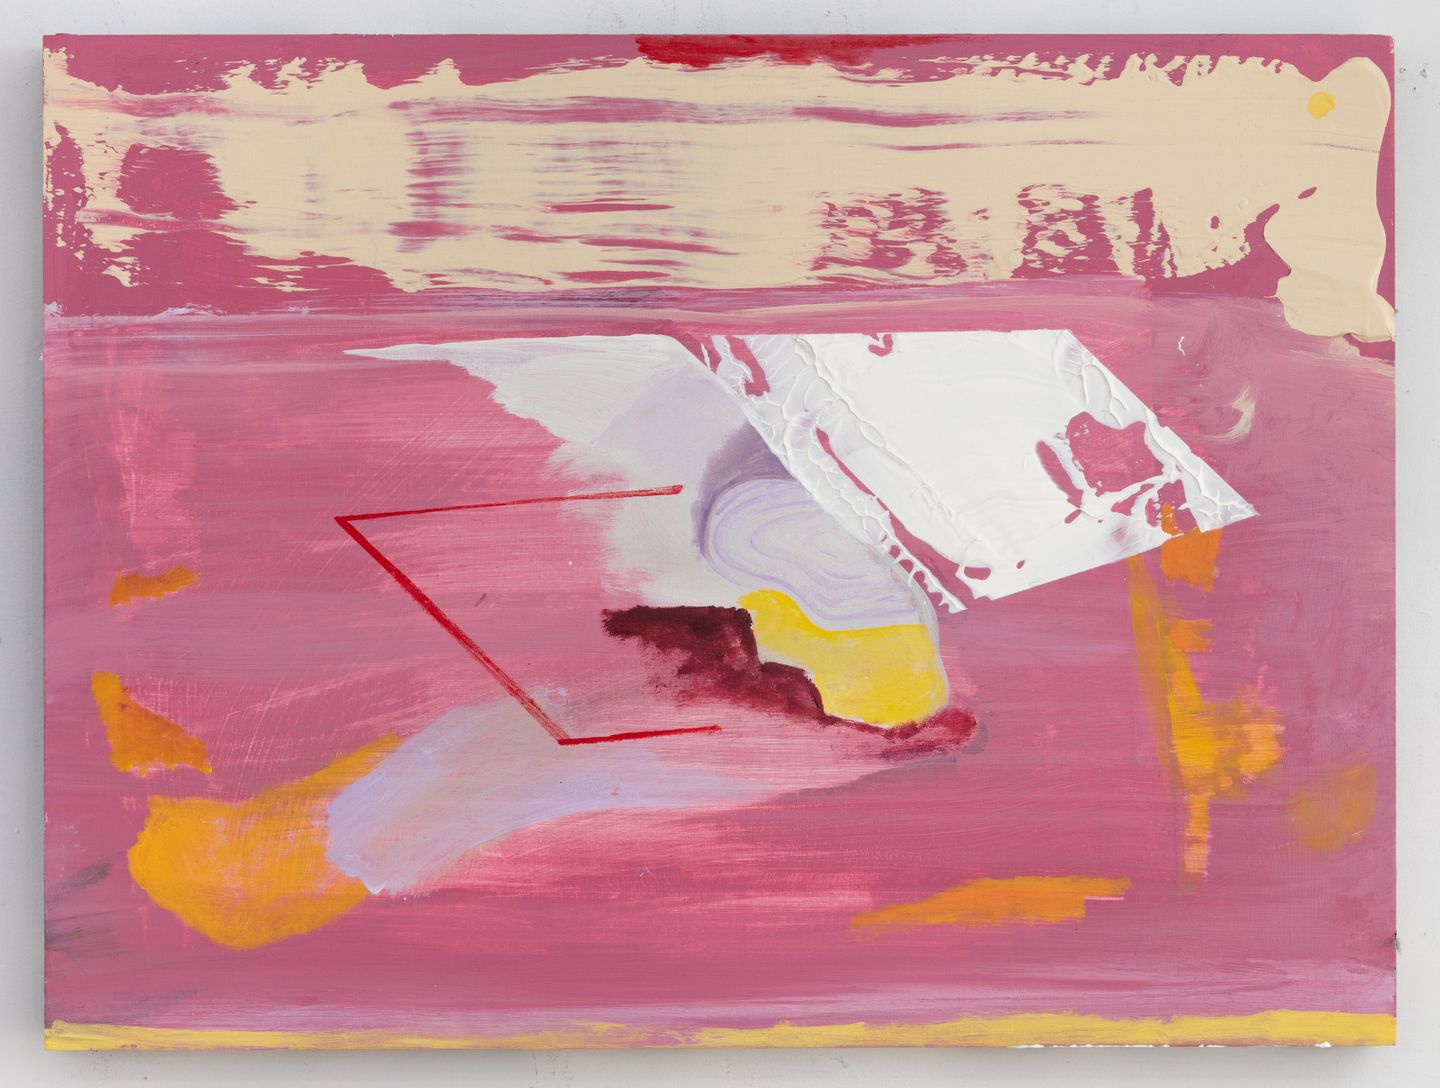 Walter Price, Learning to love (2020). Acrylic, super white, and gesso on wood. 45.9 x 61.1 x 4.1 cm. Courtesy the artist, The Modern Institute/Toby Webster Ltd., Glasgow and Greene Naftali, New York.